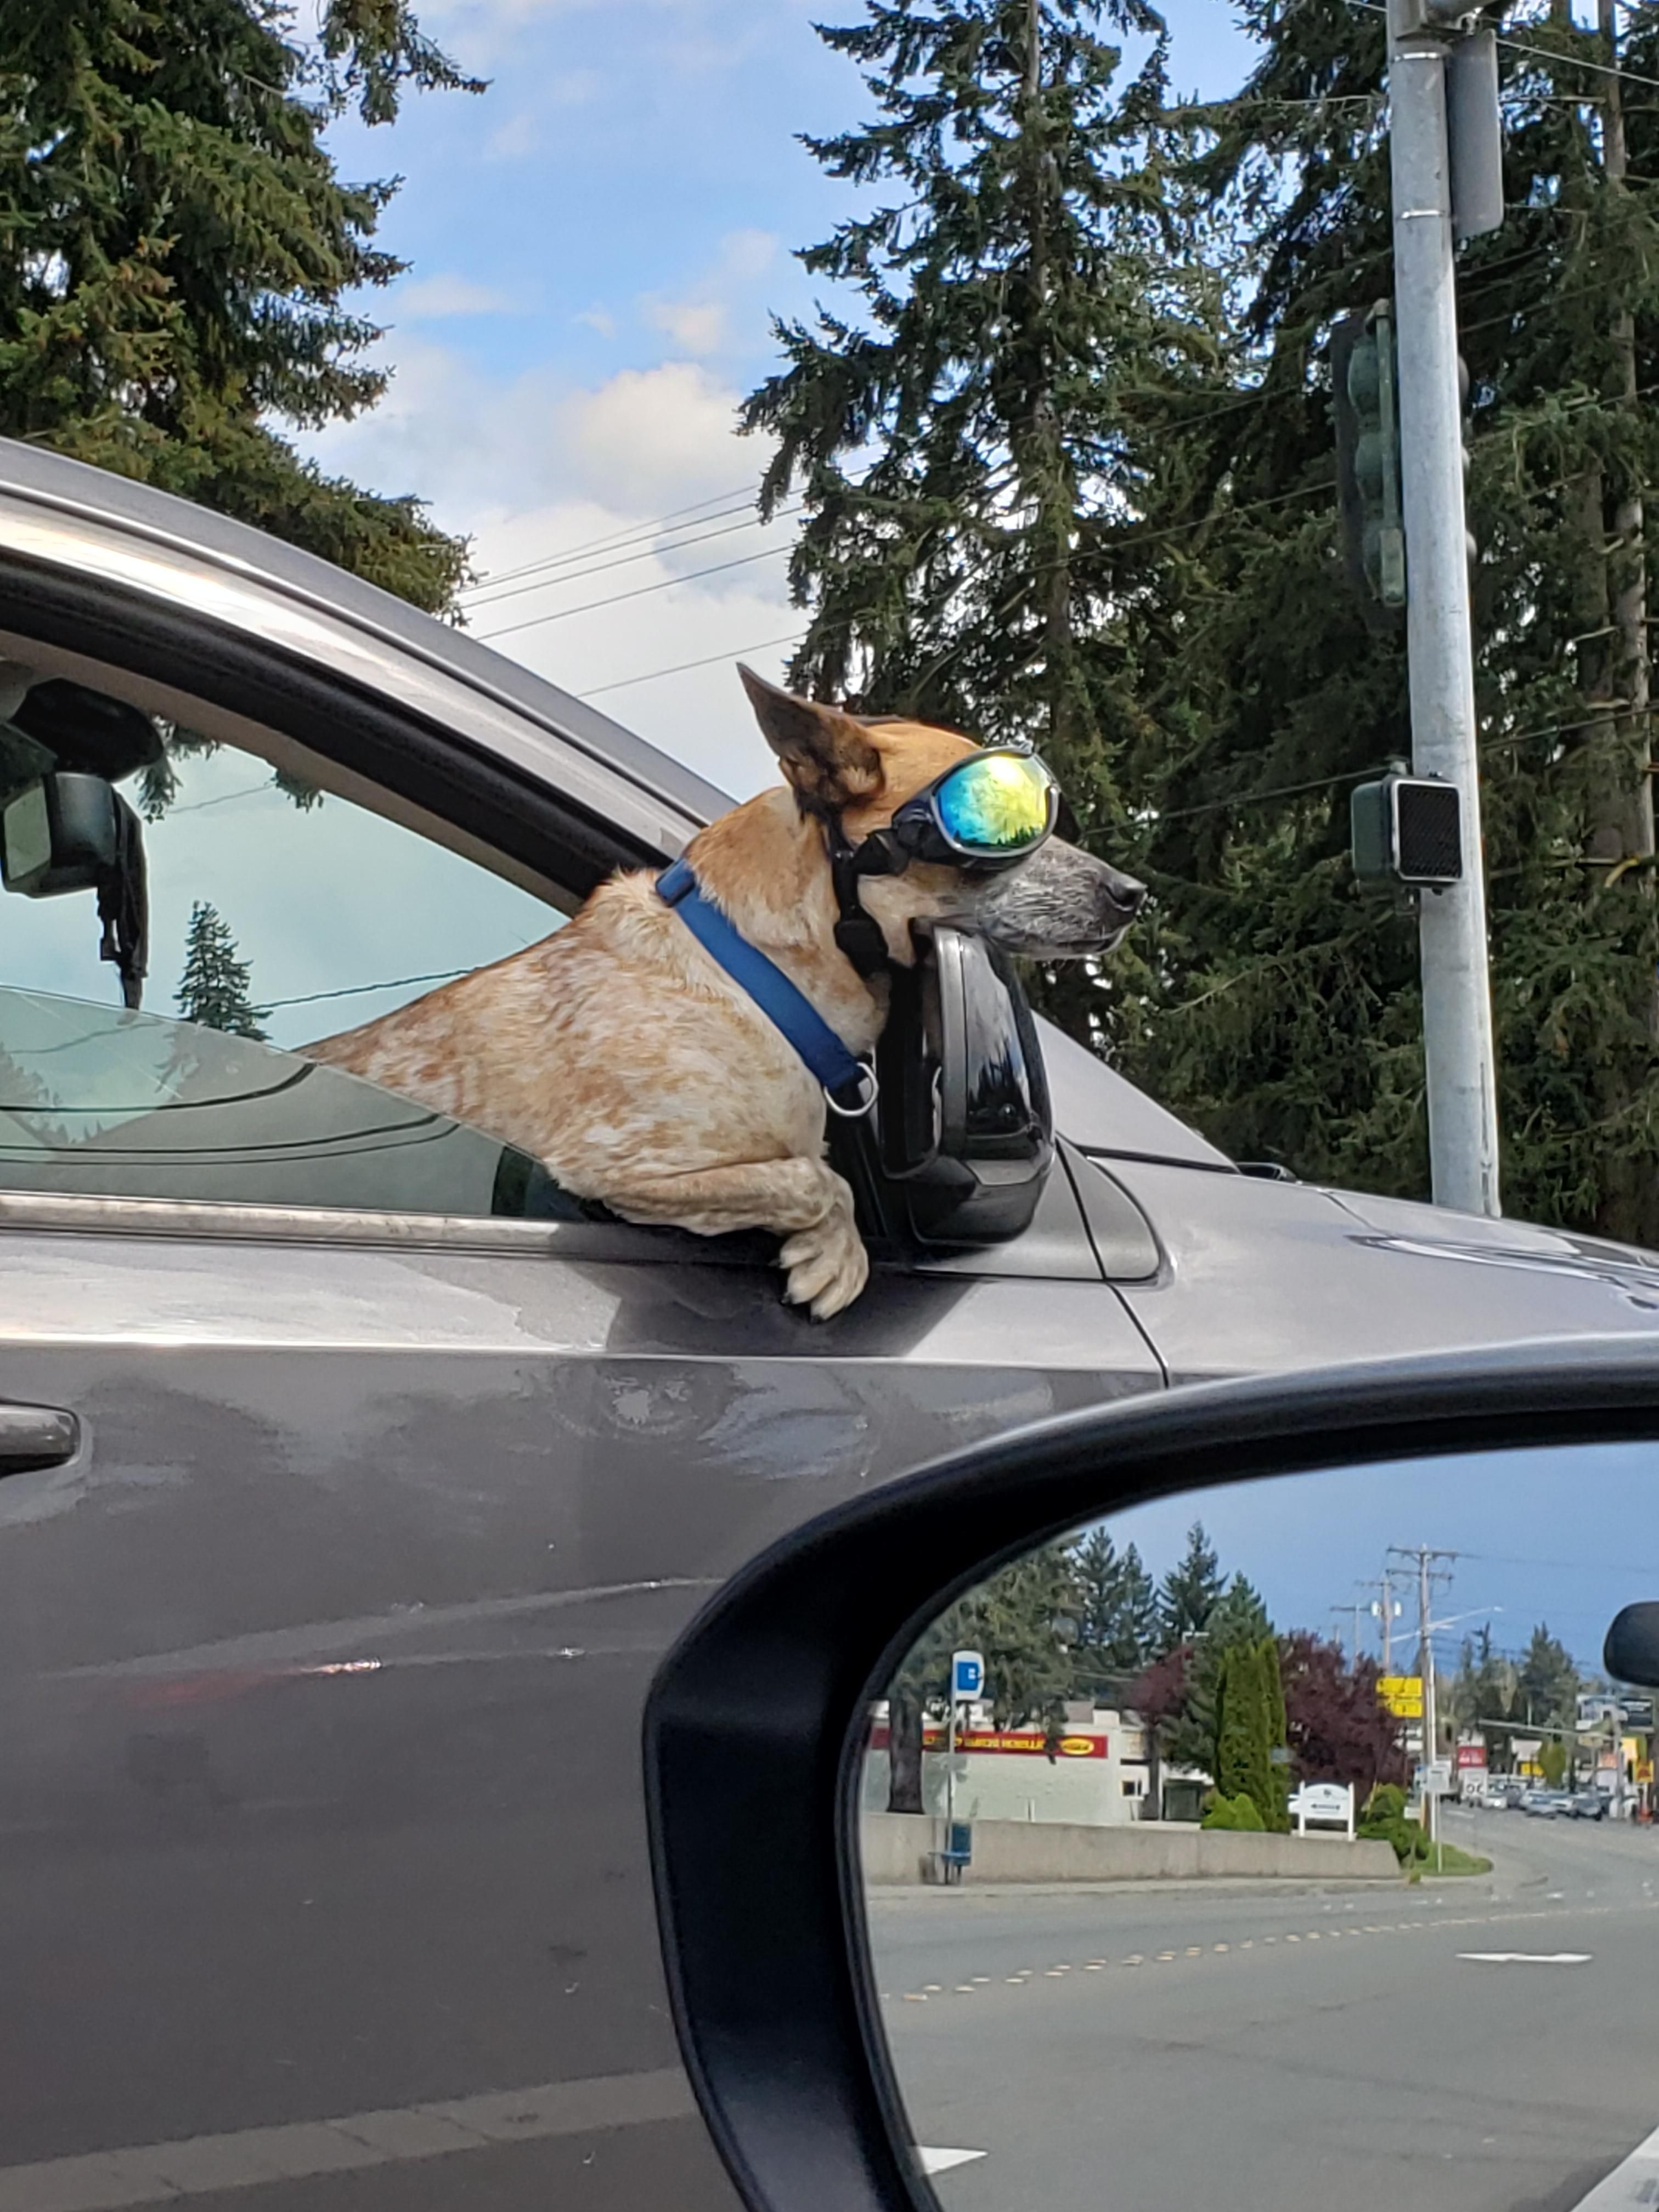 This dog is cooler than everyone.